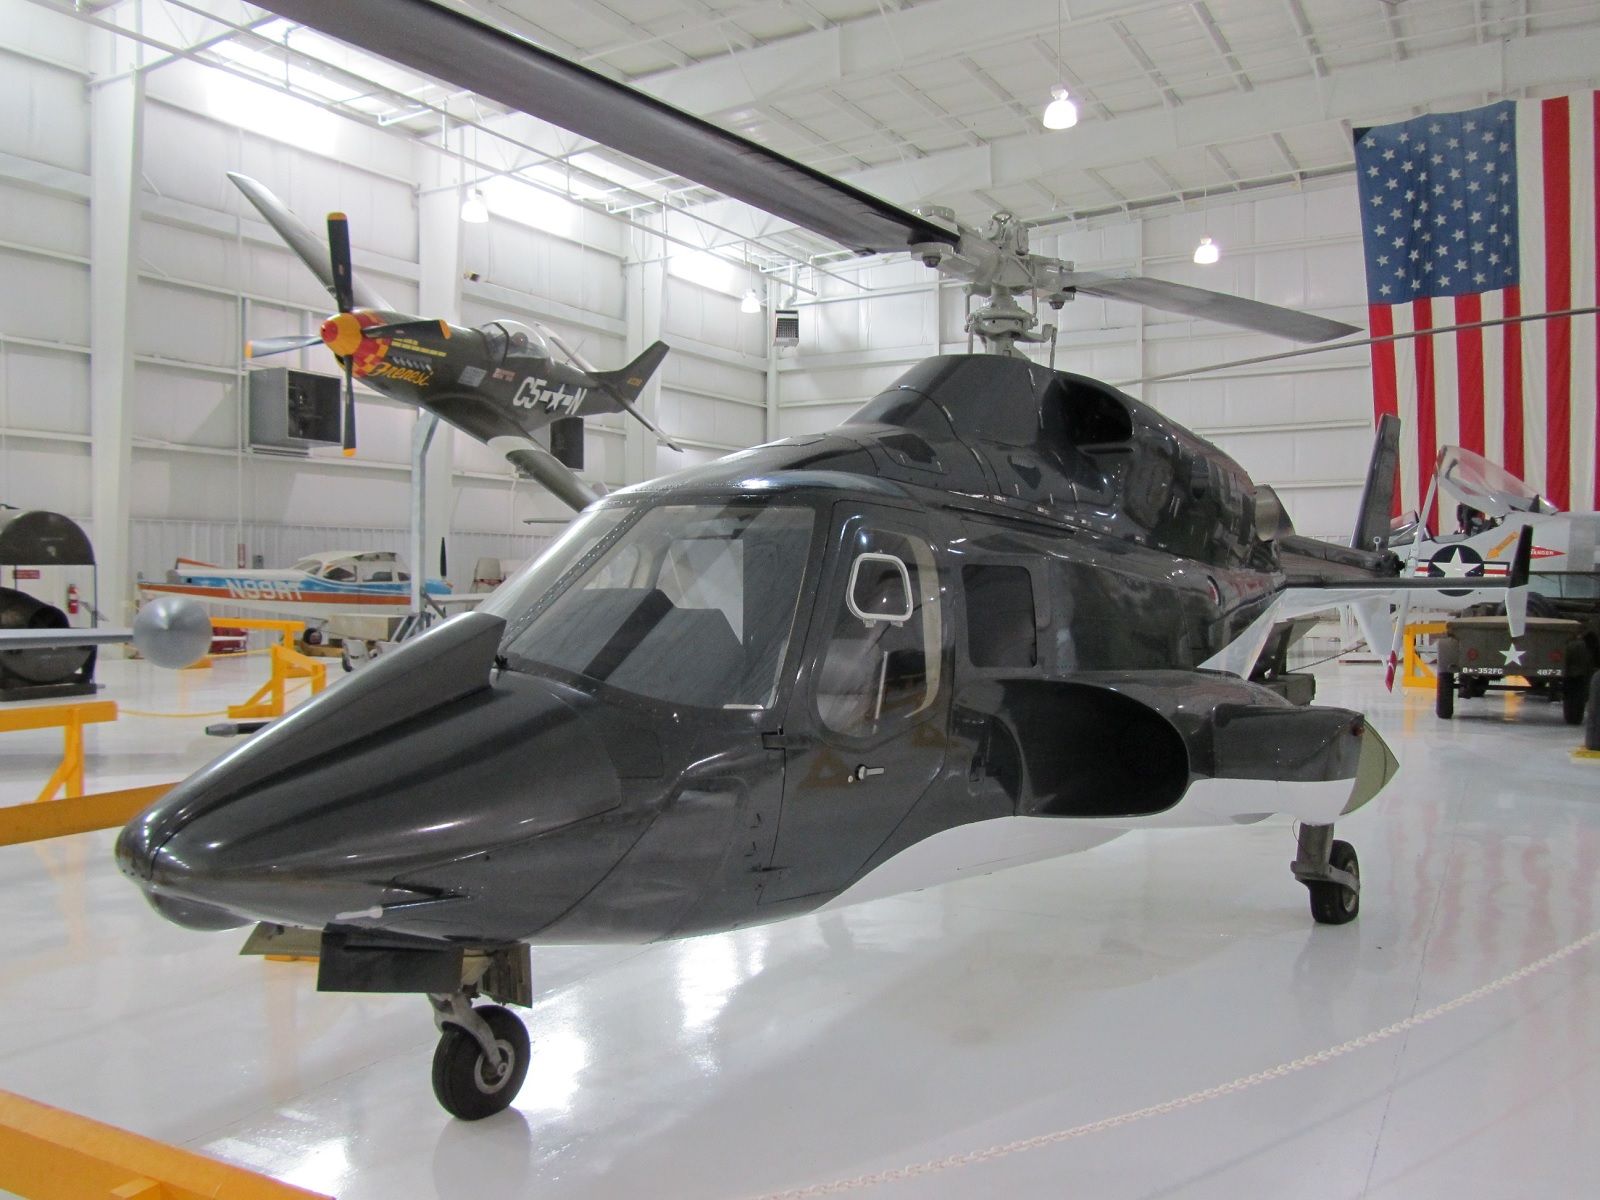 Best Helicopters And Attack Choppers Of All Time image 14